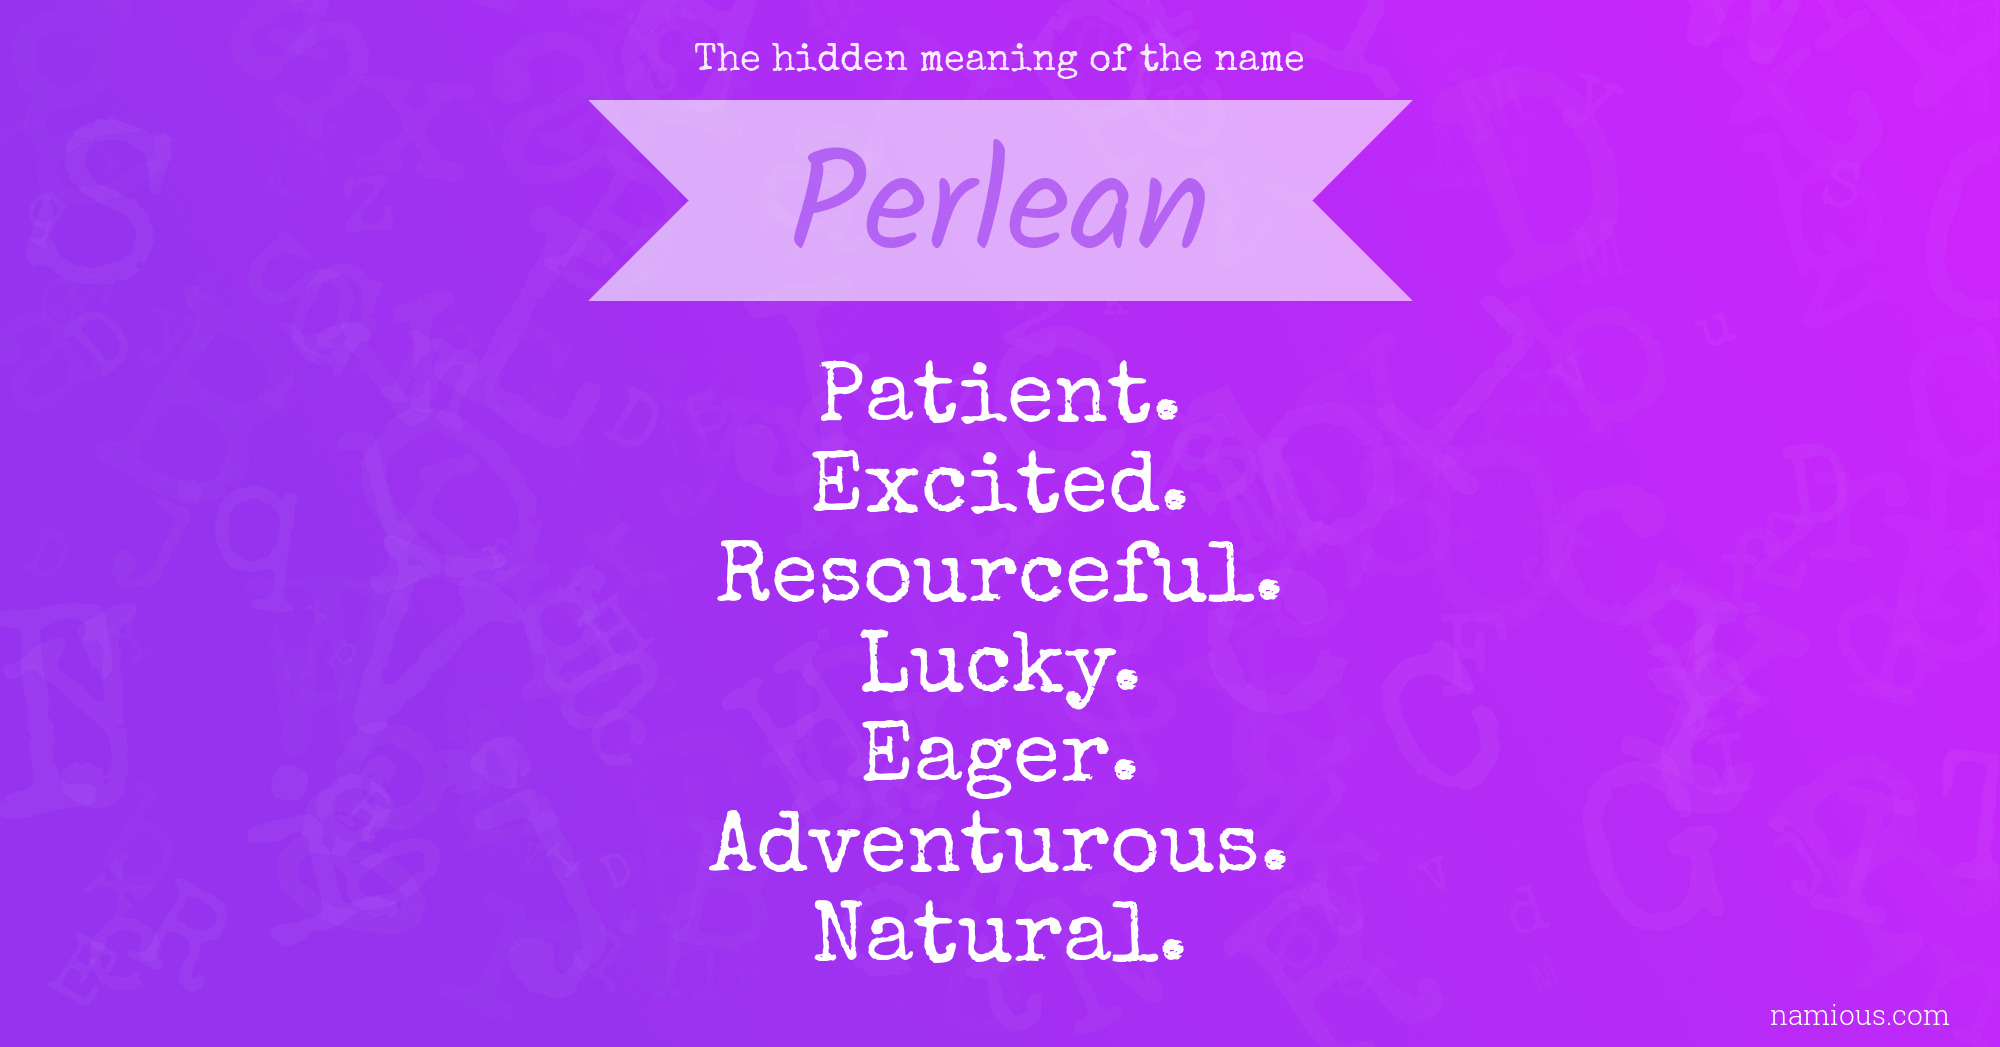 The hidden meaning of the name Perlean